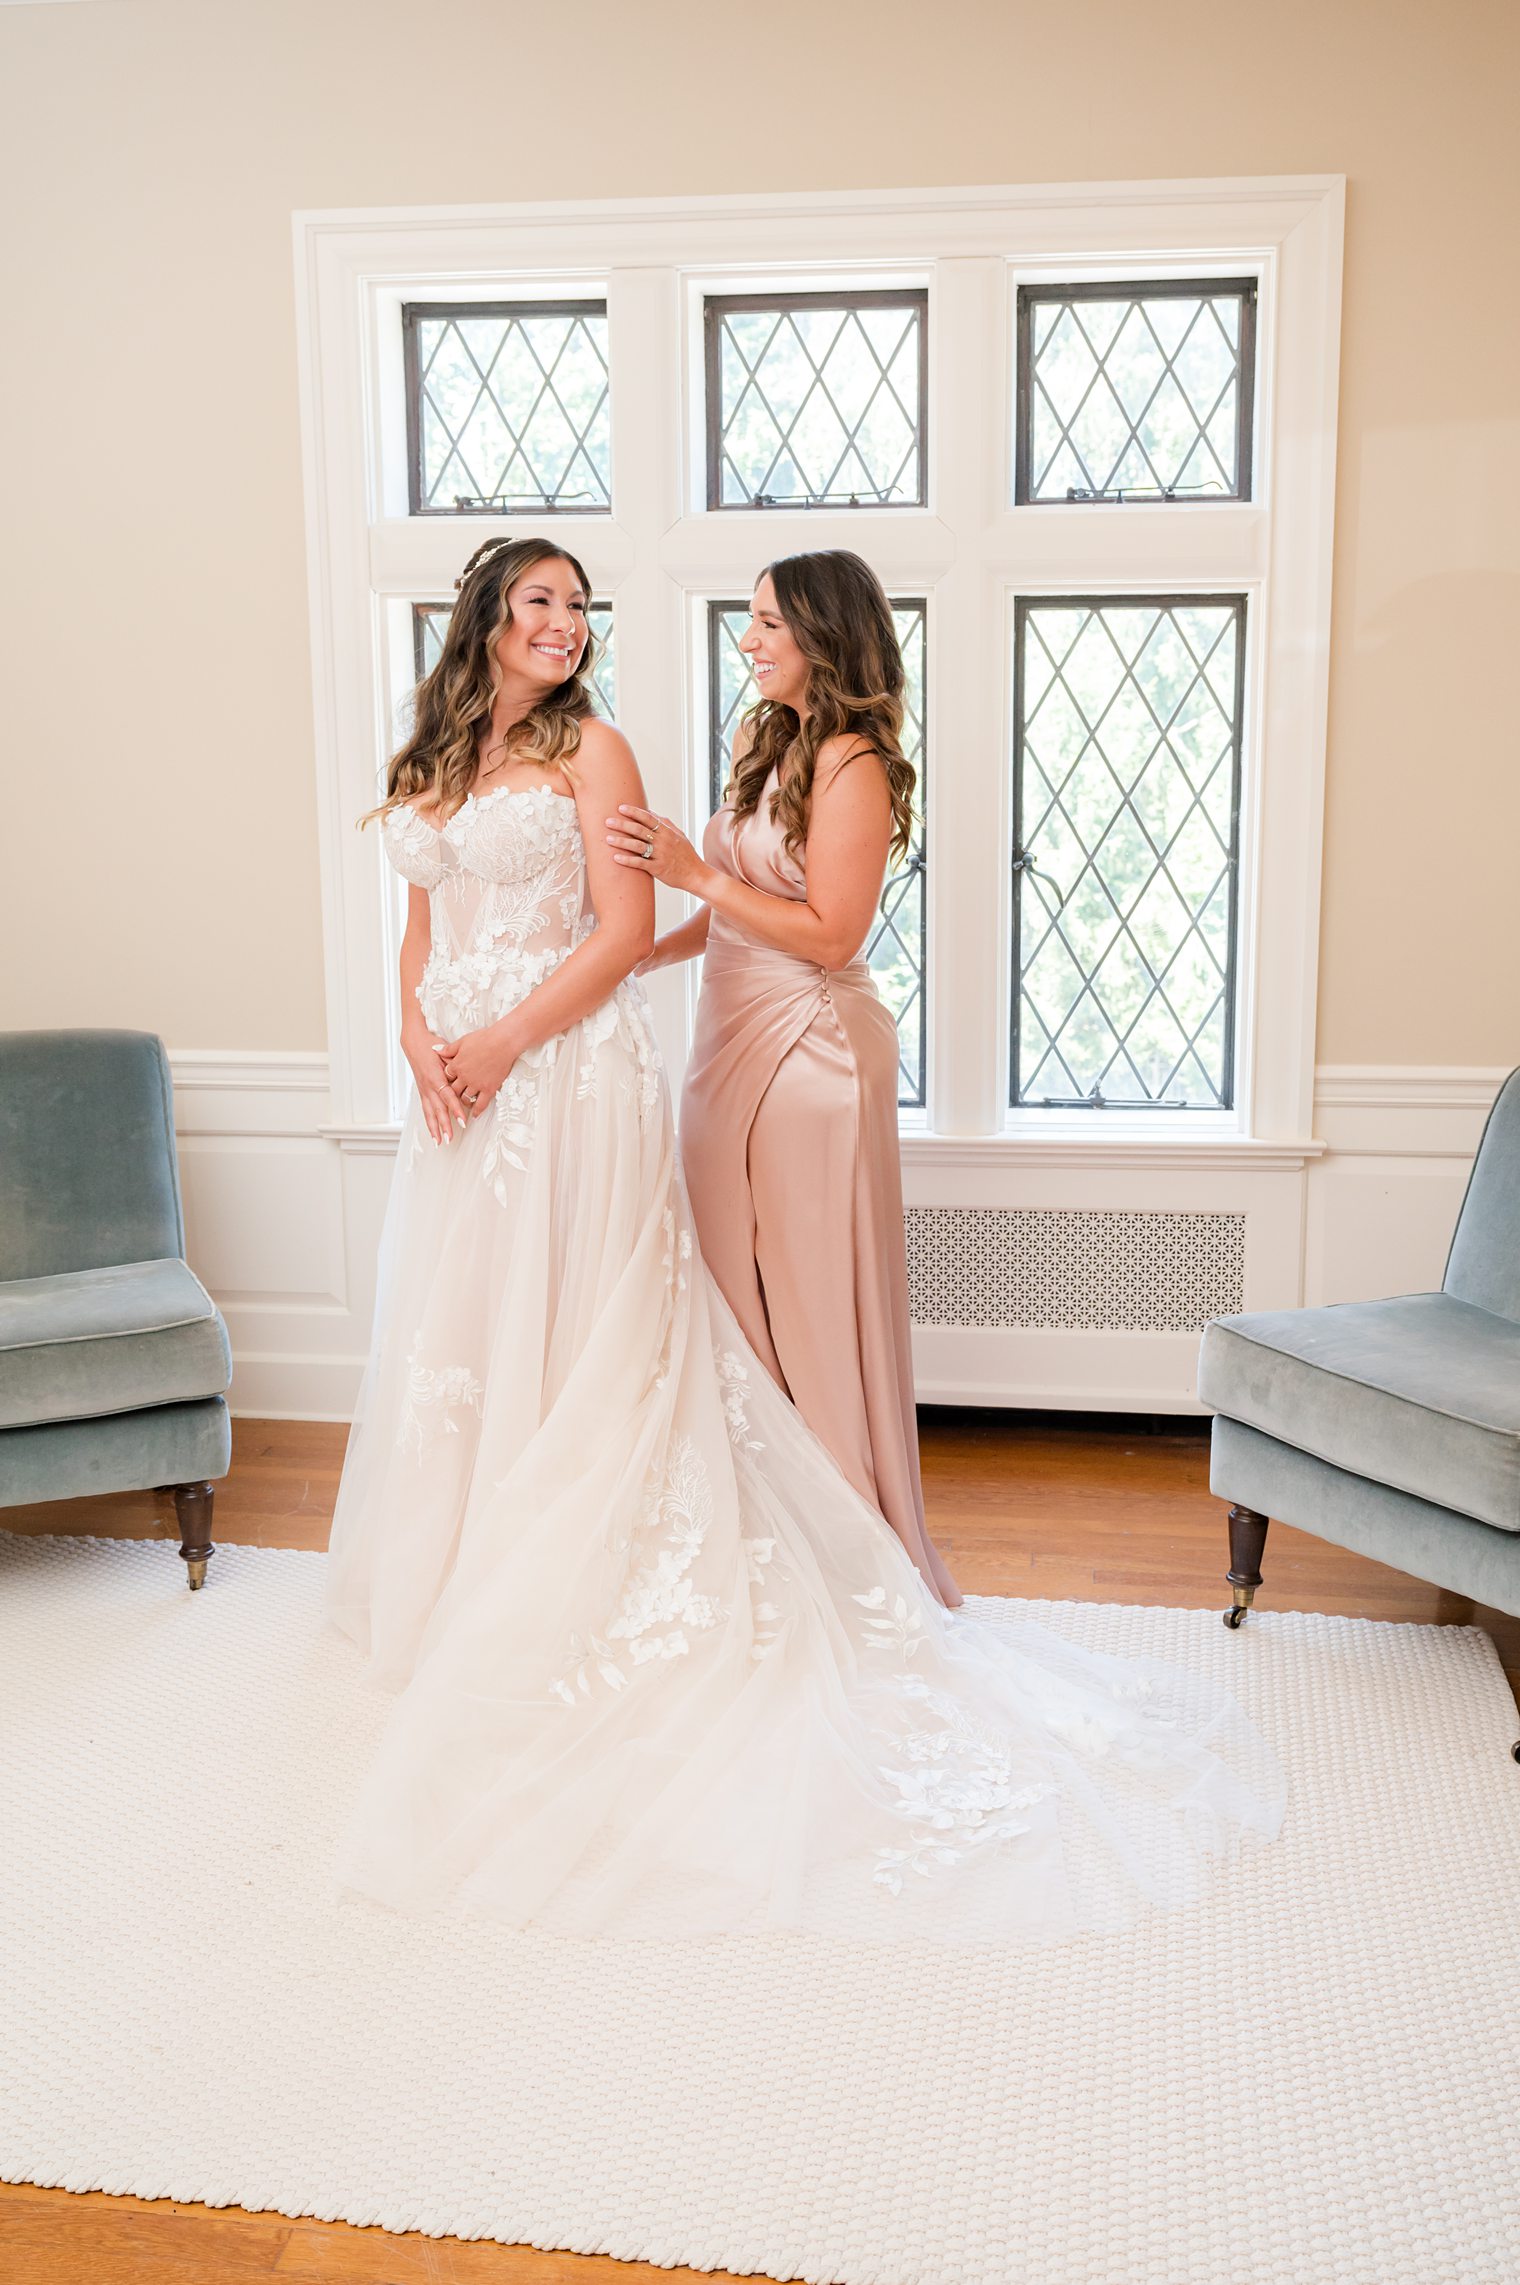 Beautiful bride smiling and enjoying her moment with her bridesmaid Riverhouse at Rumson Country Club